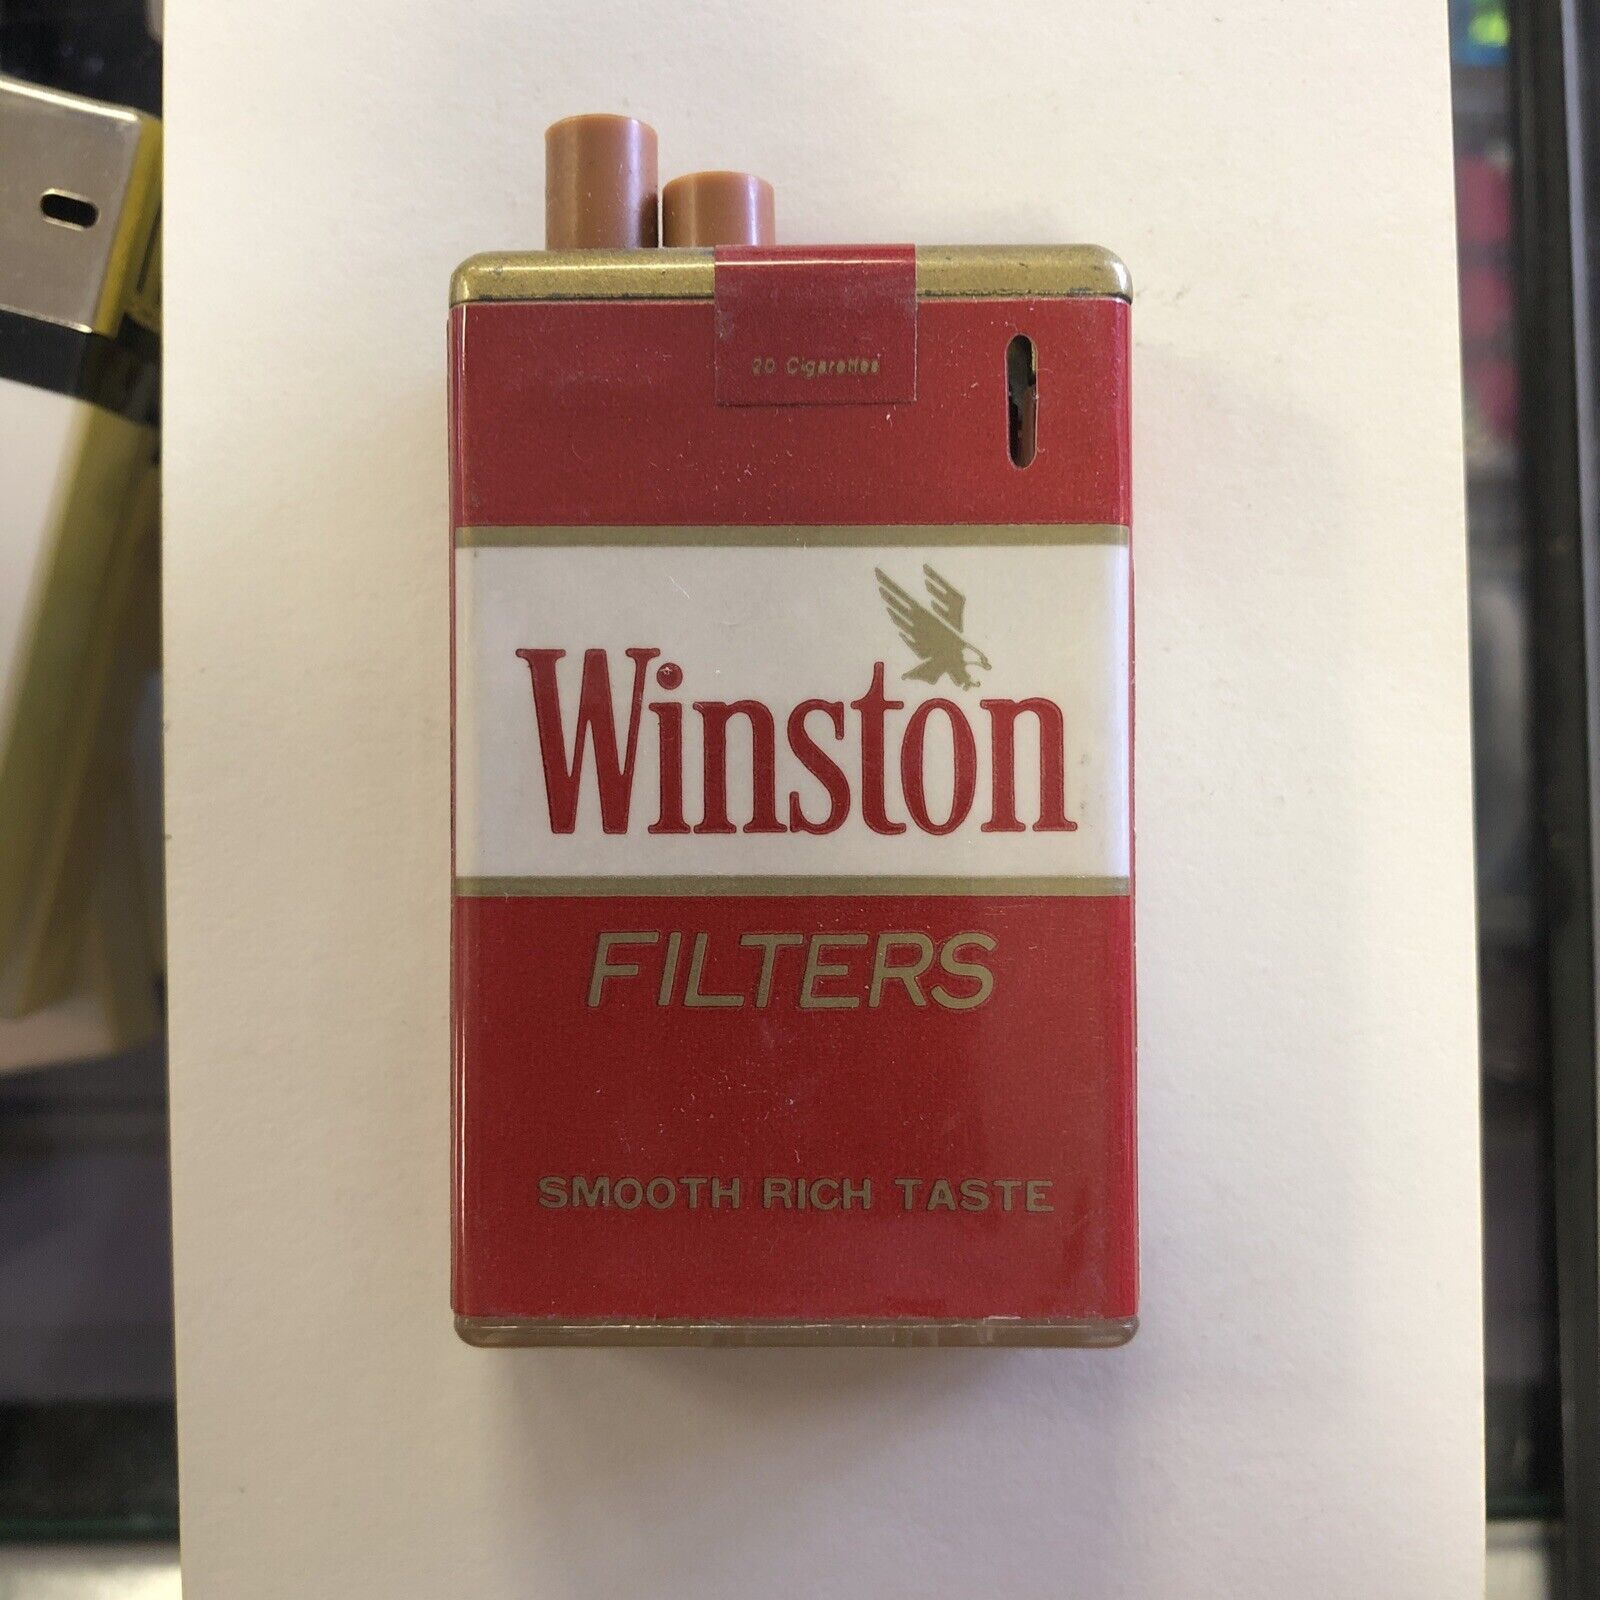 Vintage Winston Filters Cigarette Package Lighter, Red Pack, Tobacco Collectible